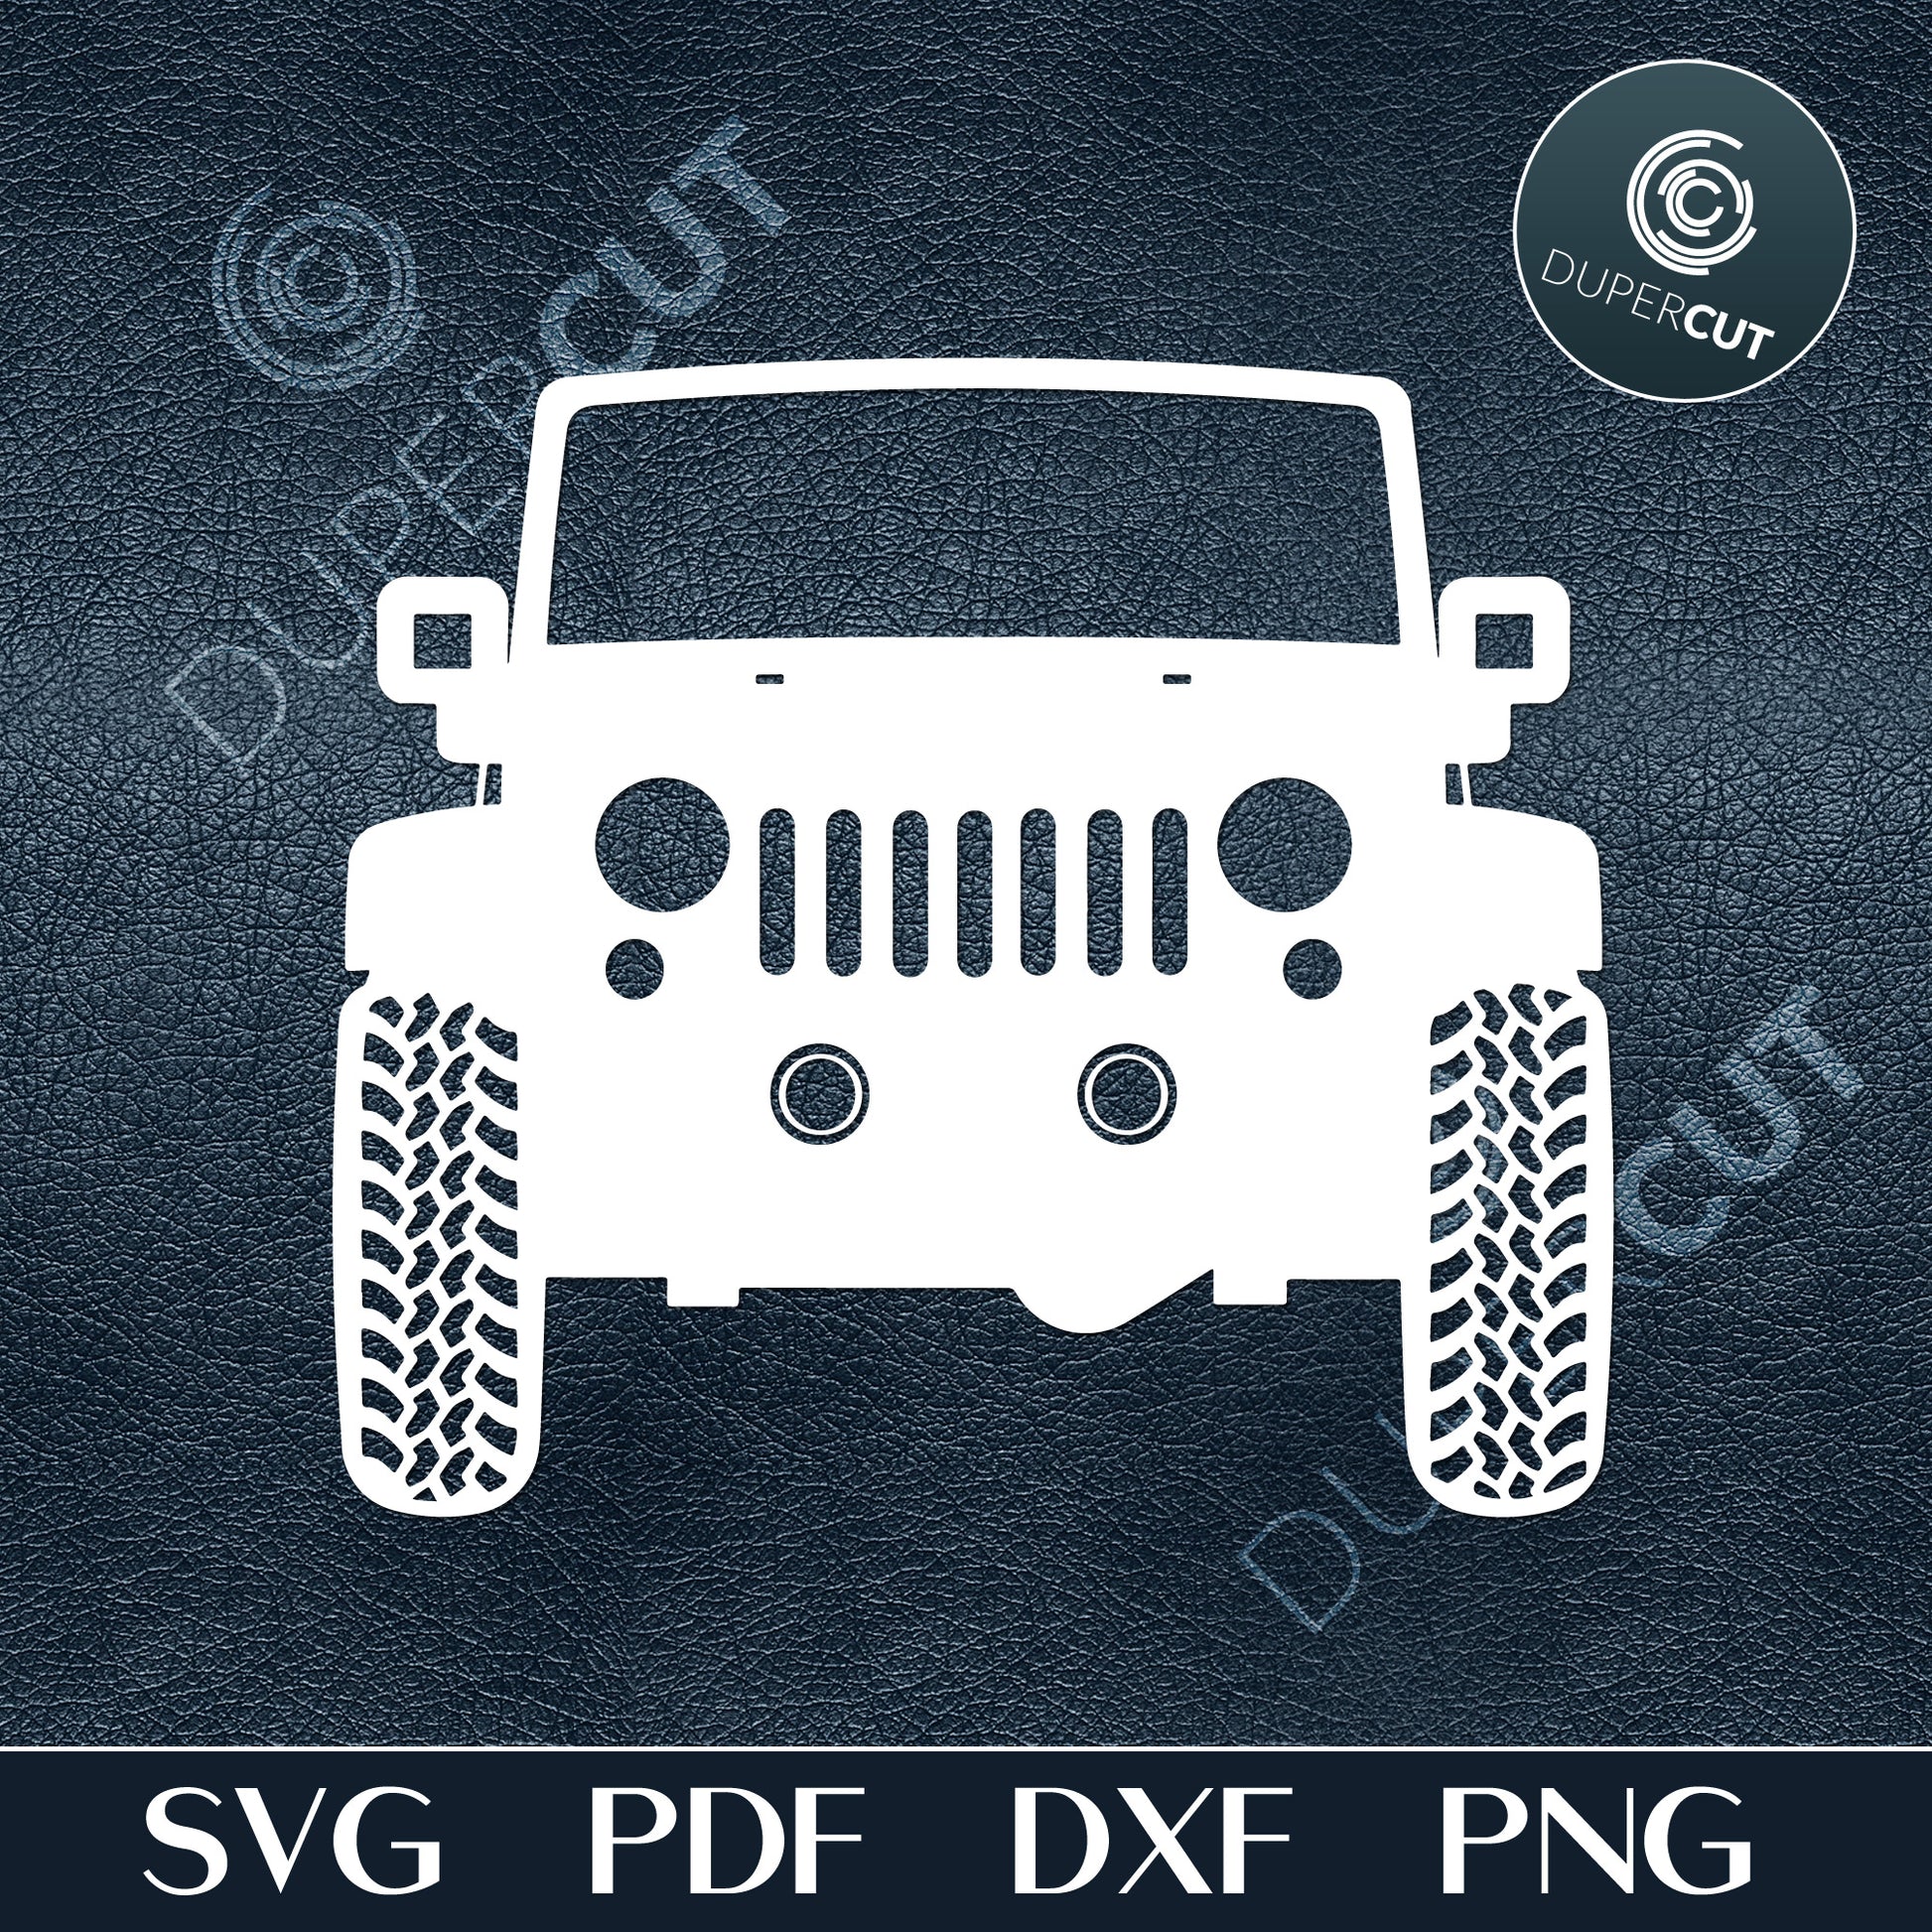 Jeep front view. Offroading graphics for personal or commercial use. Black and white silhouette clipart for crafting, print on demand, custom t-shirts, vinyl template, stencil, printables